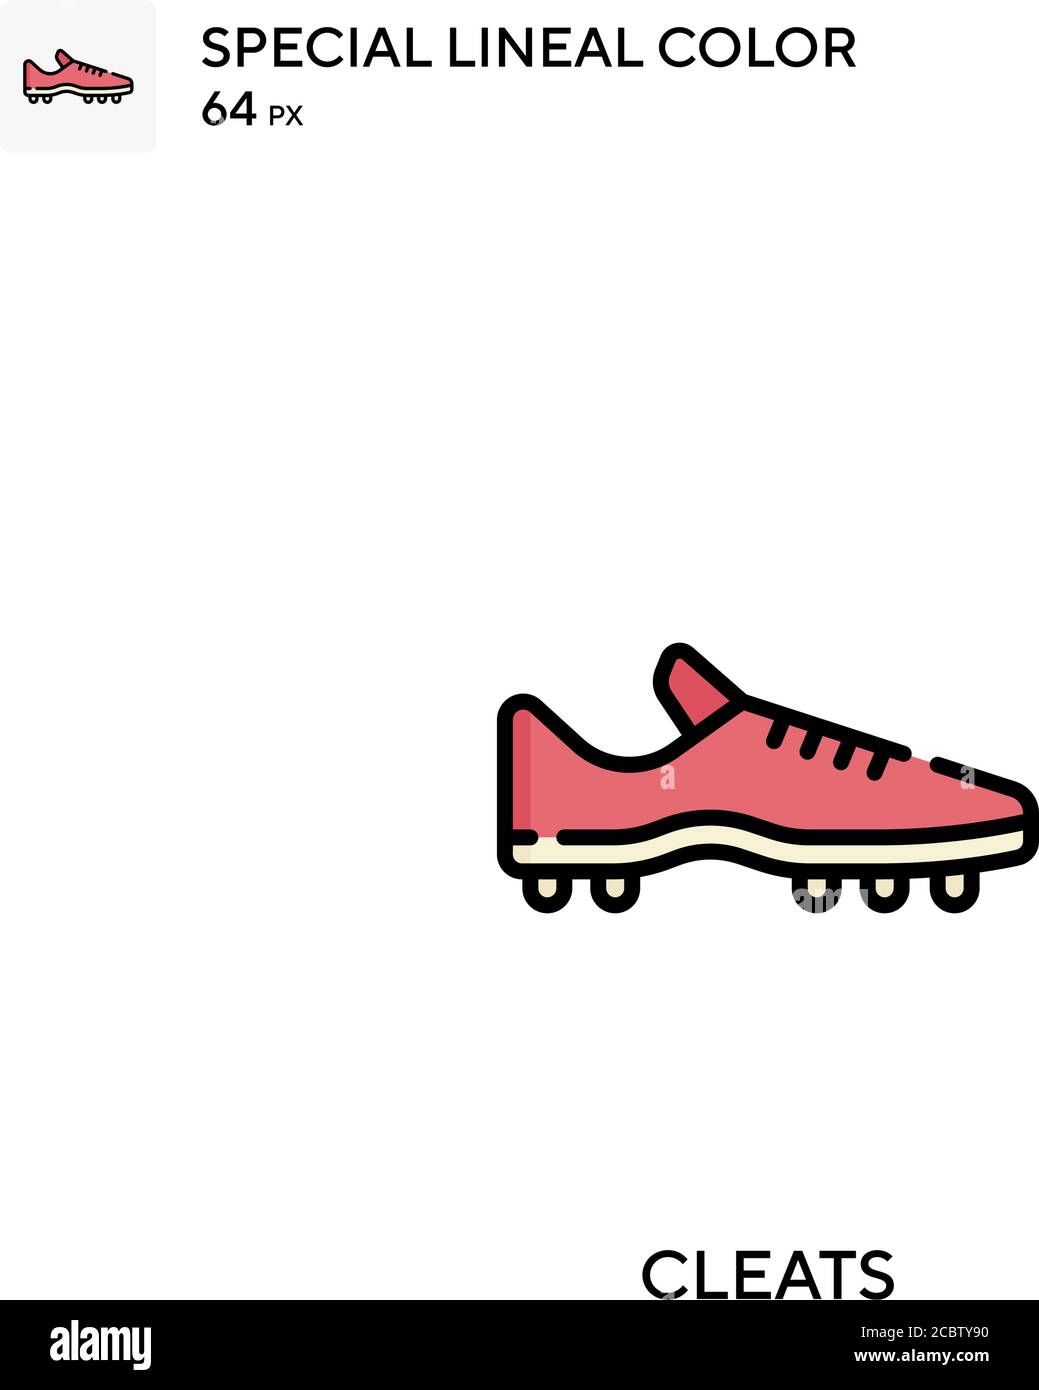 Cleats Special lineal color vector icon. Cleats icons for your business ...